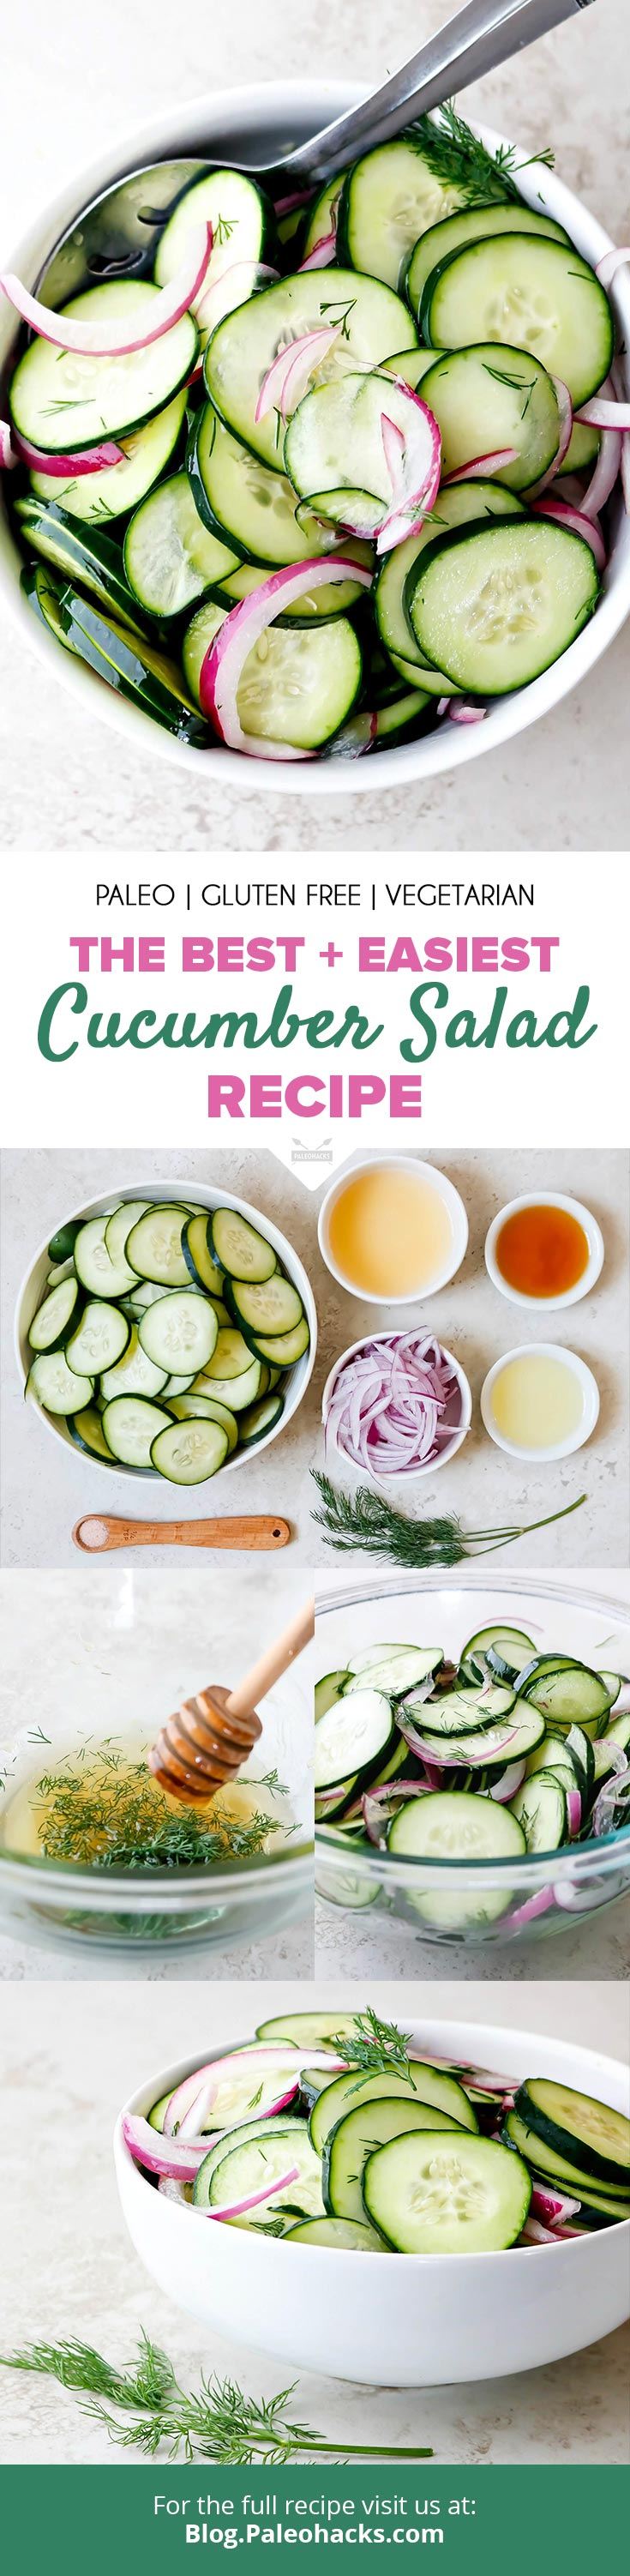 Dig into this refreshing and crunchy cucumber salad tossed in probiotic-rich apple cider vinegar and immune-boosting honey.